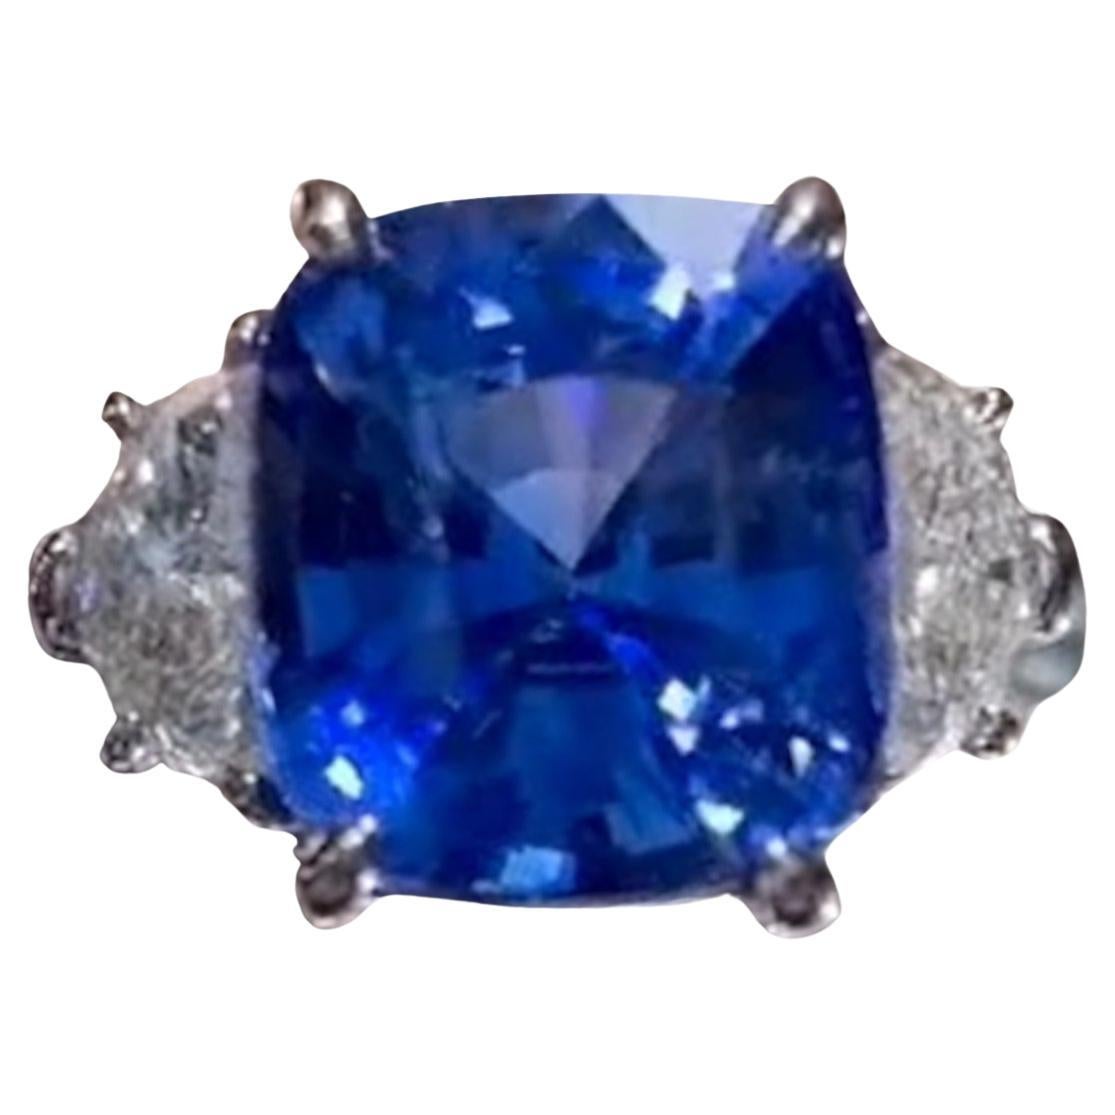 GII 5.28 Certified Sapphire Has Vibrant Blue Color